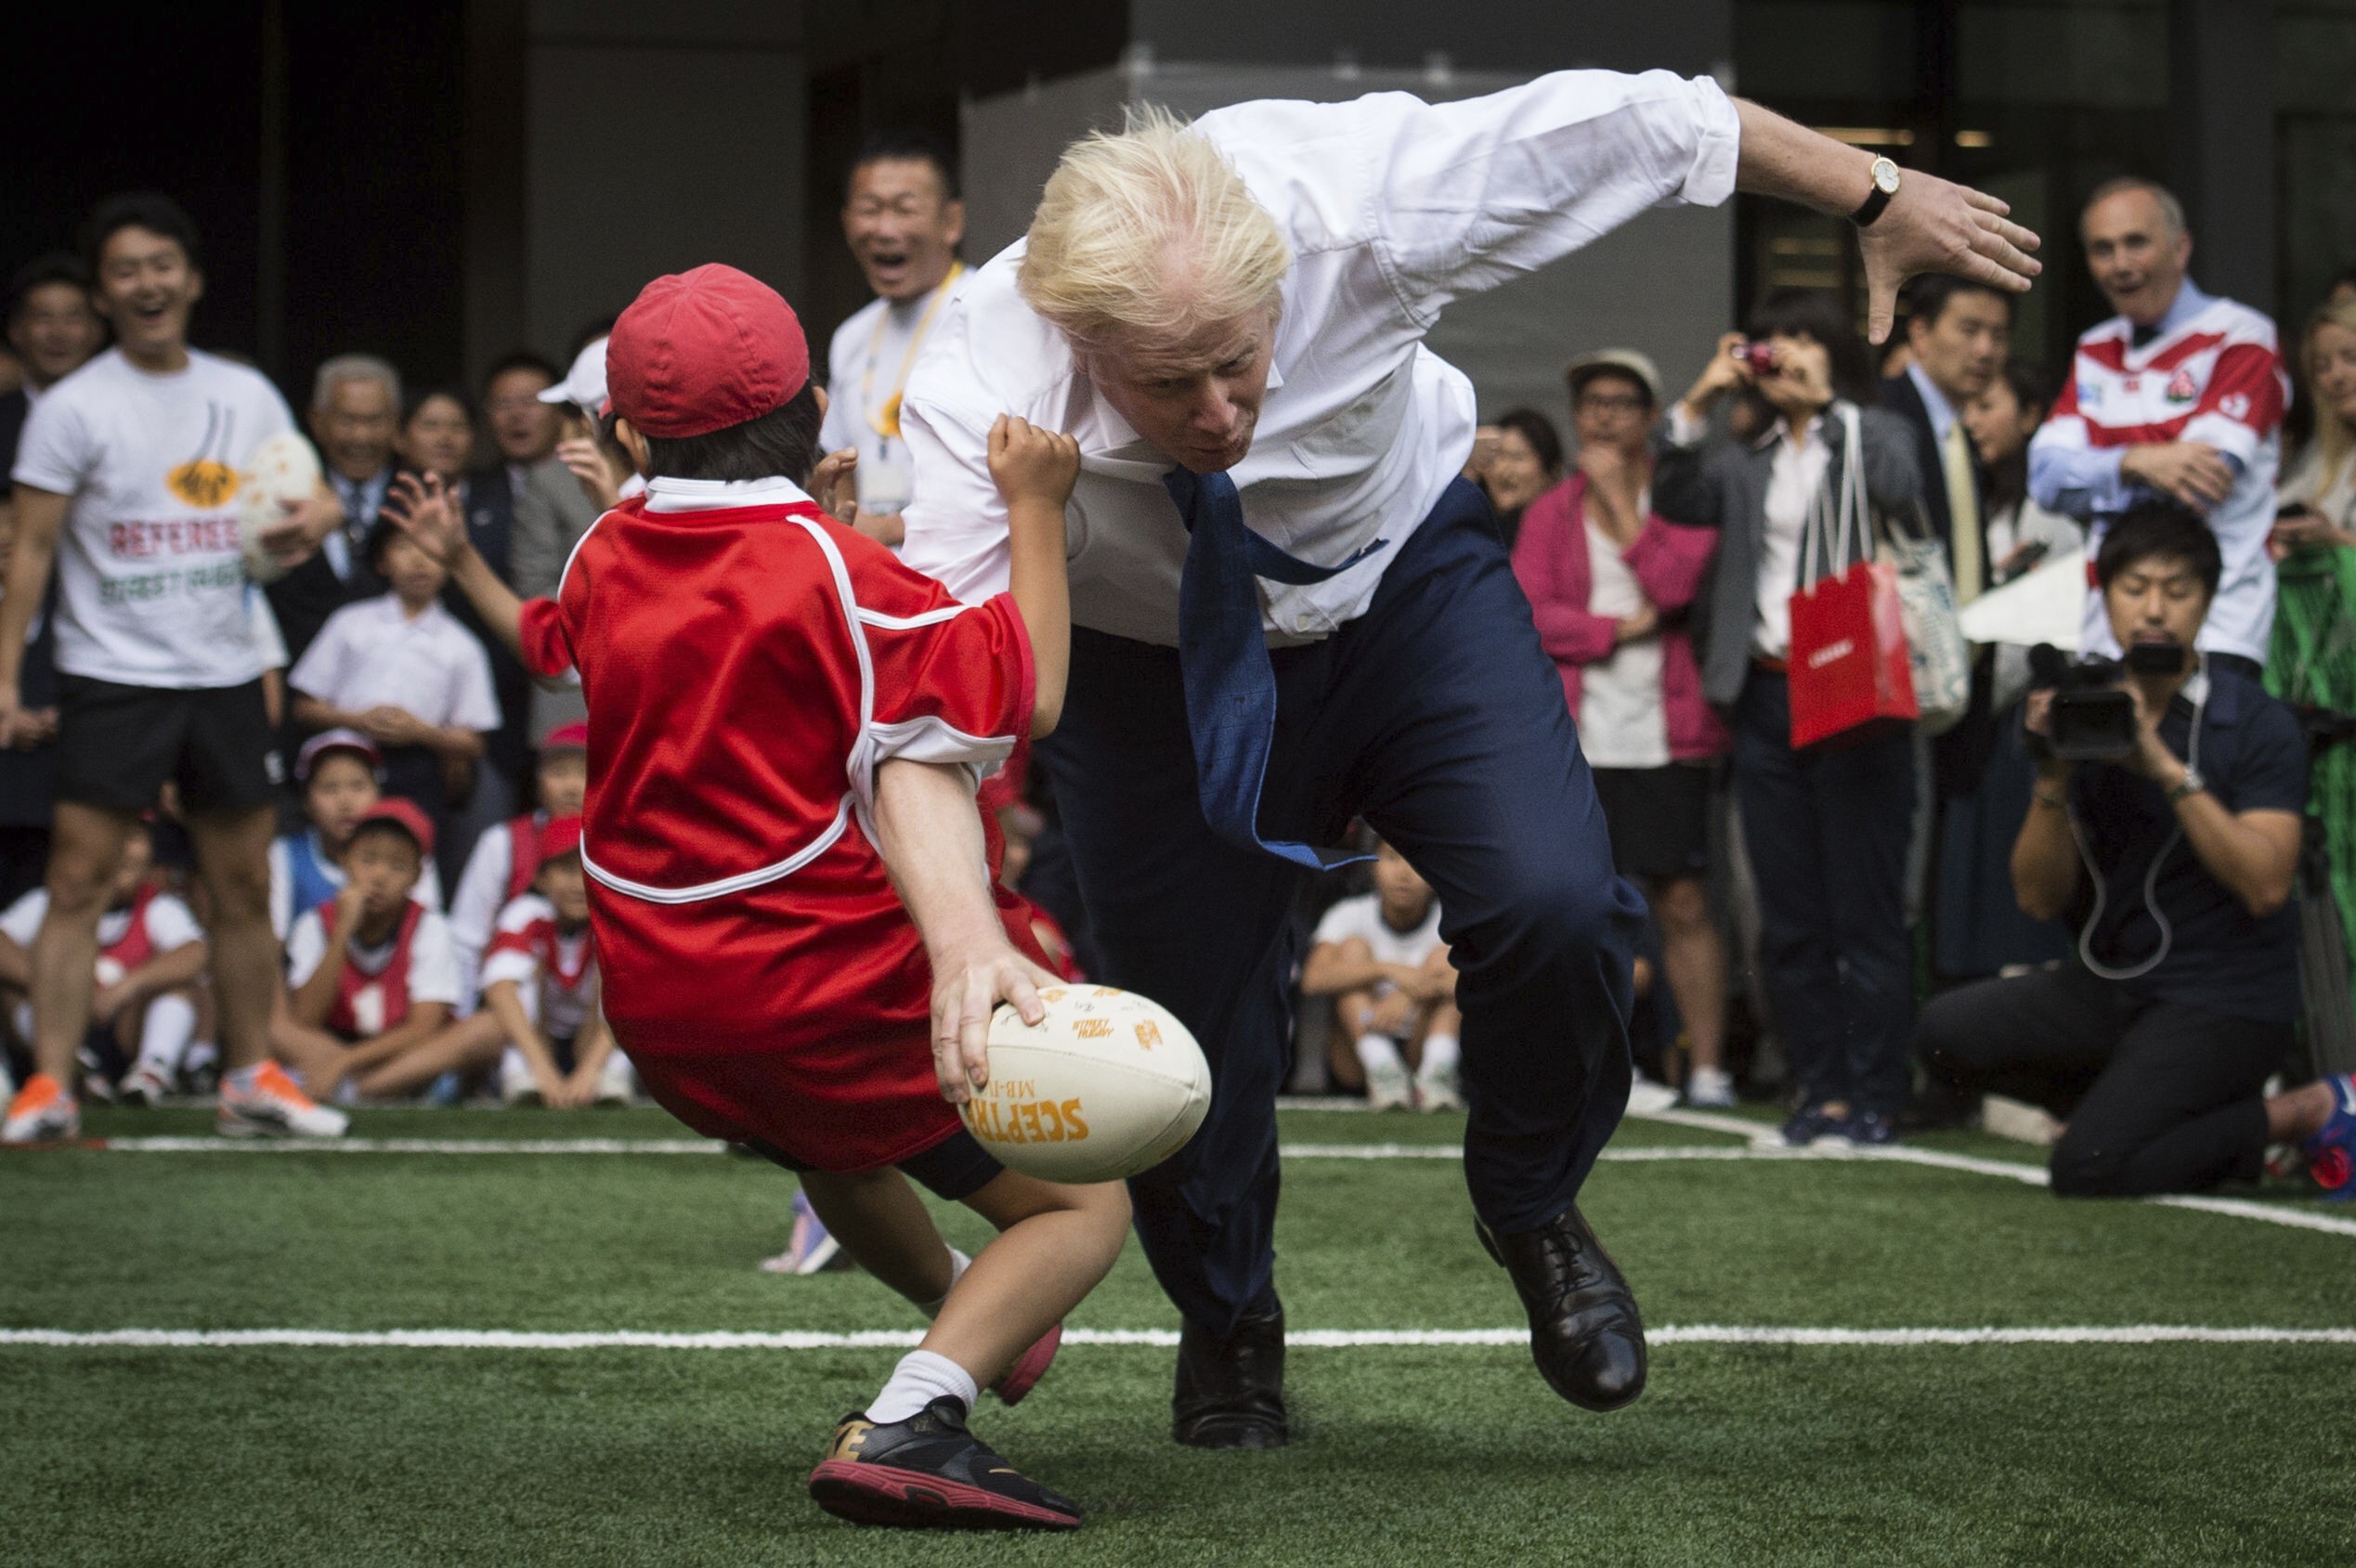 Boris Johnson knocks over a Japanese child during an exhibition rugby tournament in Tokyo. Japan has not been bowled over by Britain’s decision to exit the European Union – an idea championed by the new British prime minister. Photo: AP